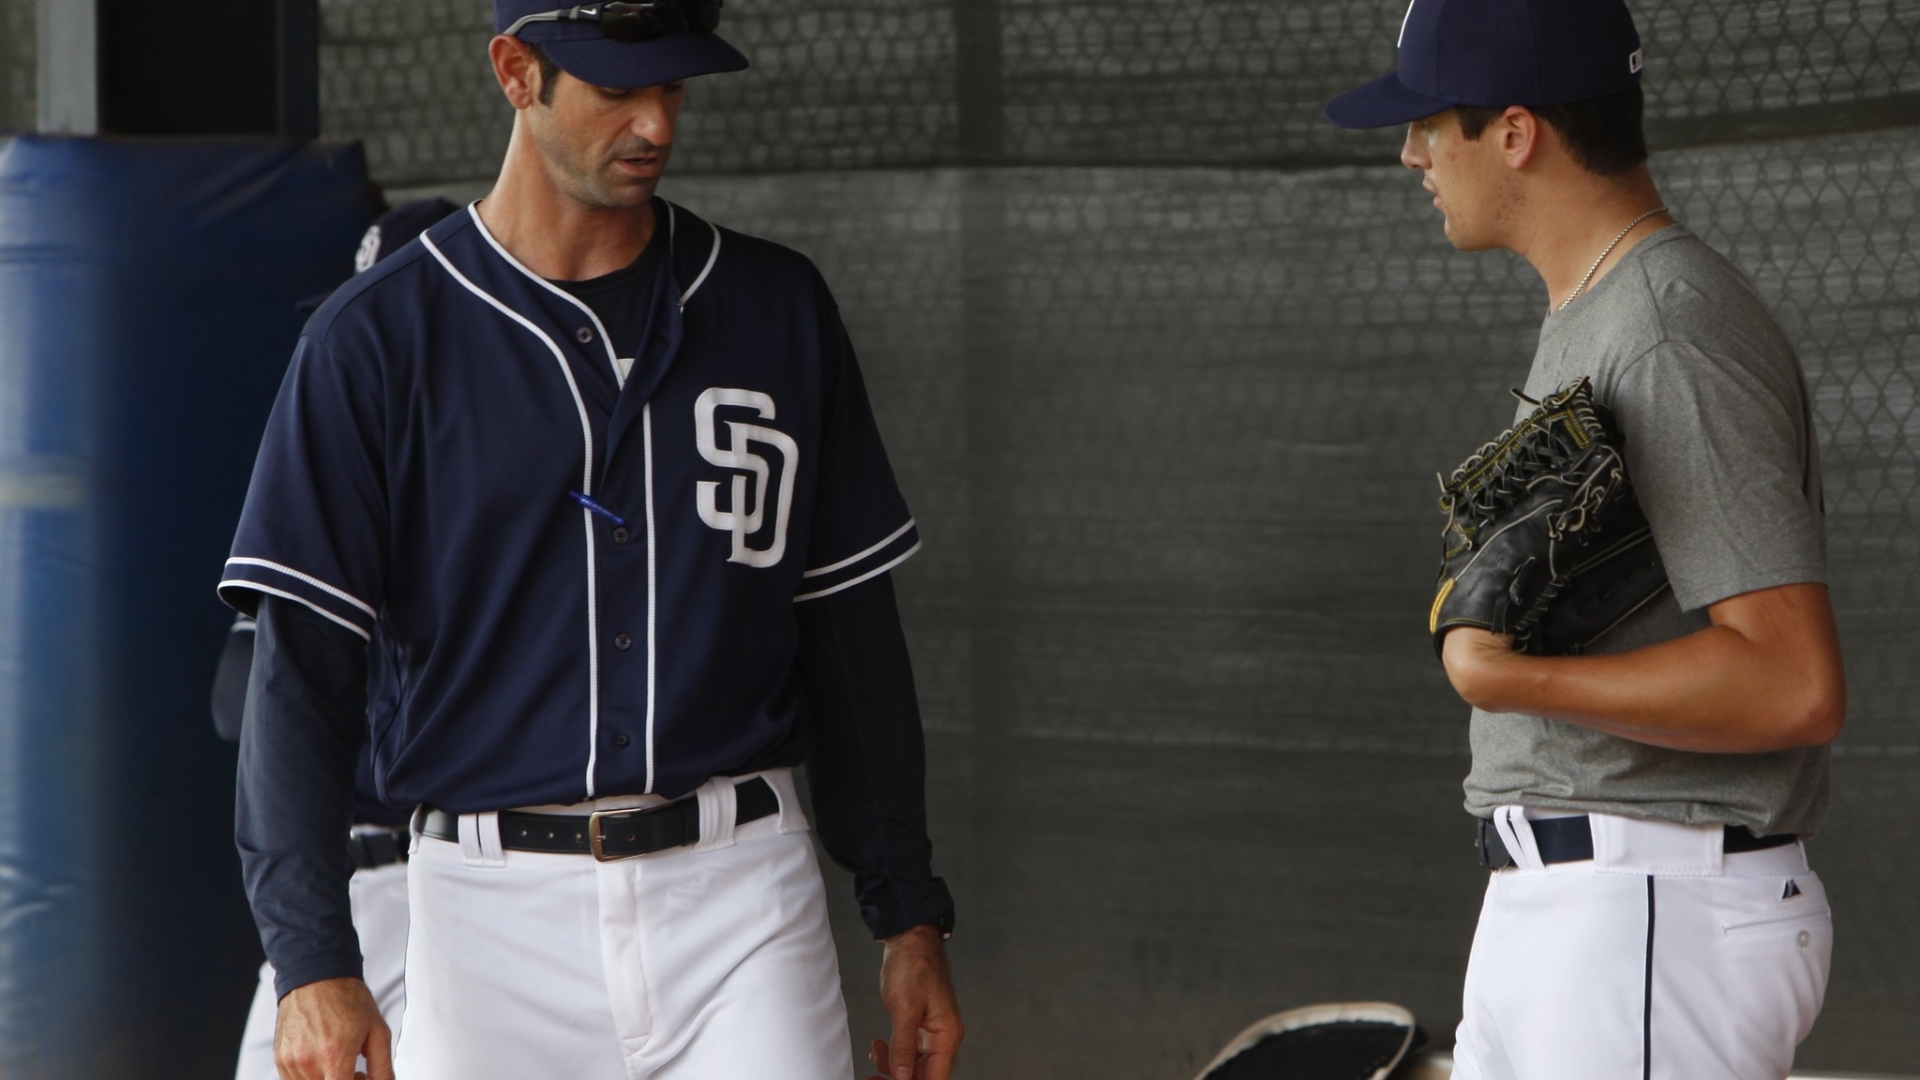 Padres unveil 2017 uniforms; yellow removed from home look - The